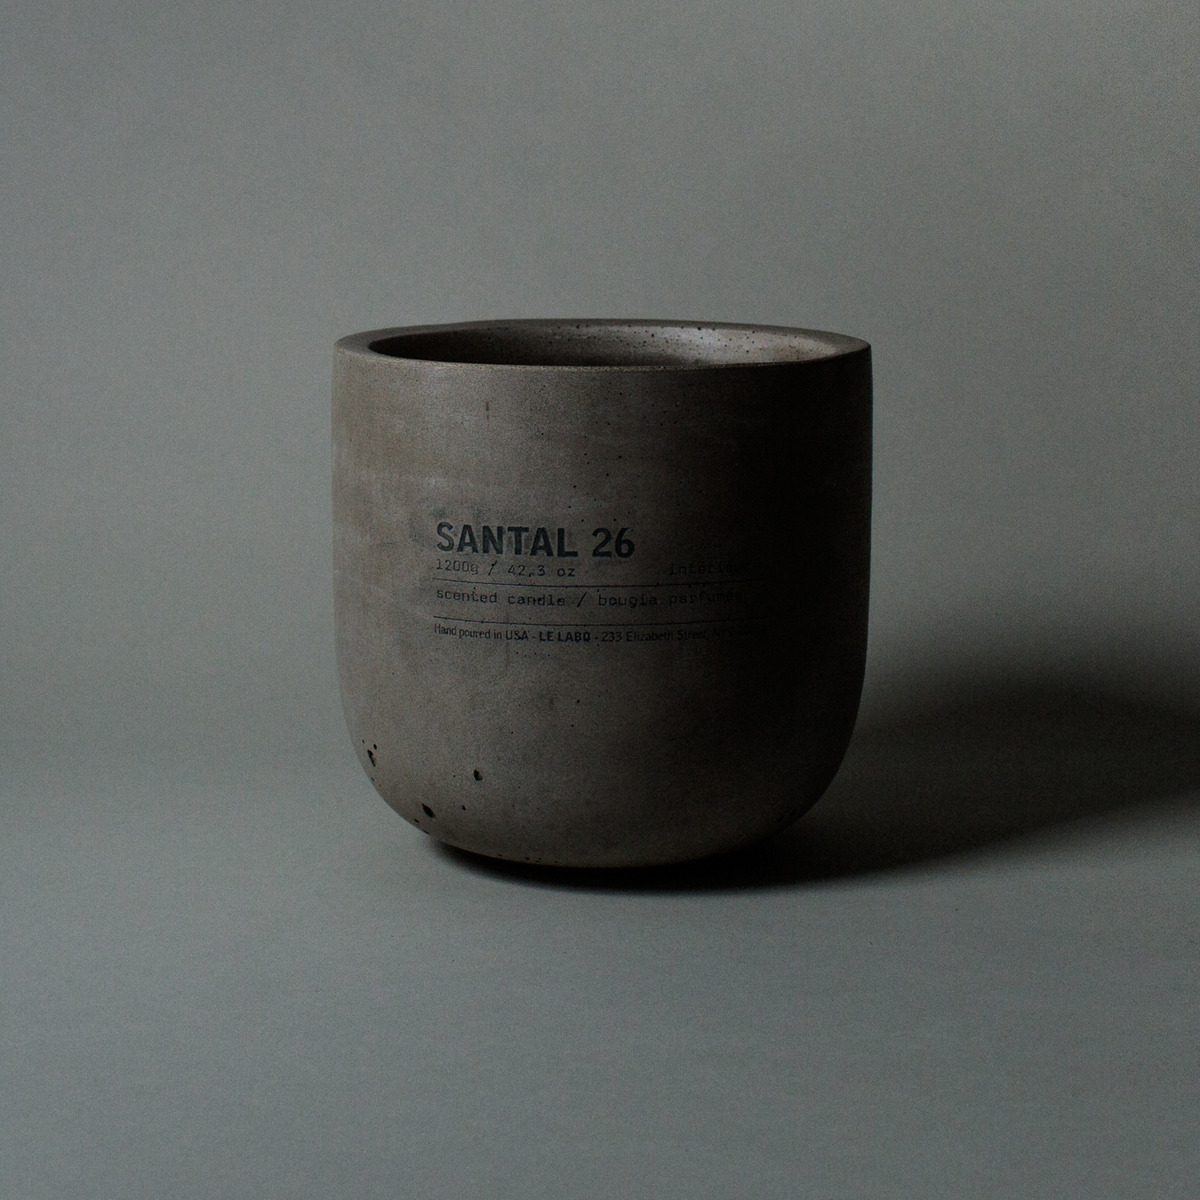 Don't let this photo fool you, cult fragrance co Le Labo's Santal 26 scented candle (vegan/ cruelty-free) is $450 of massive cement-housed candle! This one will light your fire for up to 150+ hours and comes packaged in the coolest wooden crate. SANTAL 26 concrete candle, $450 @lelabofragrances.com